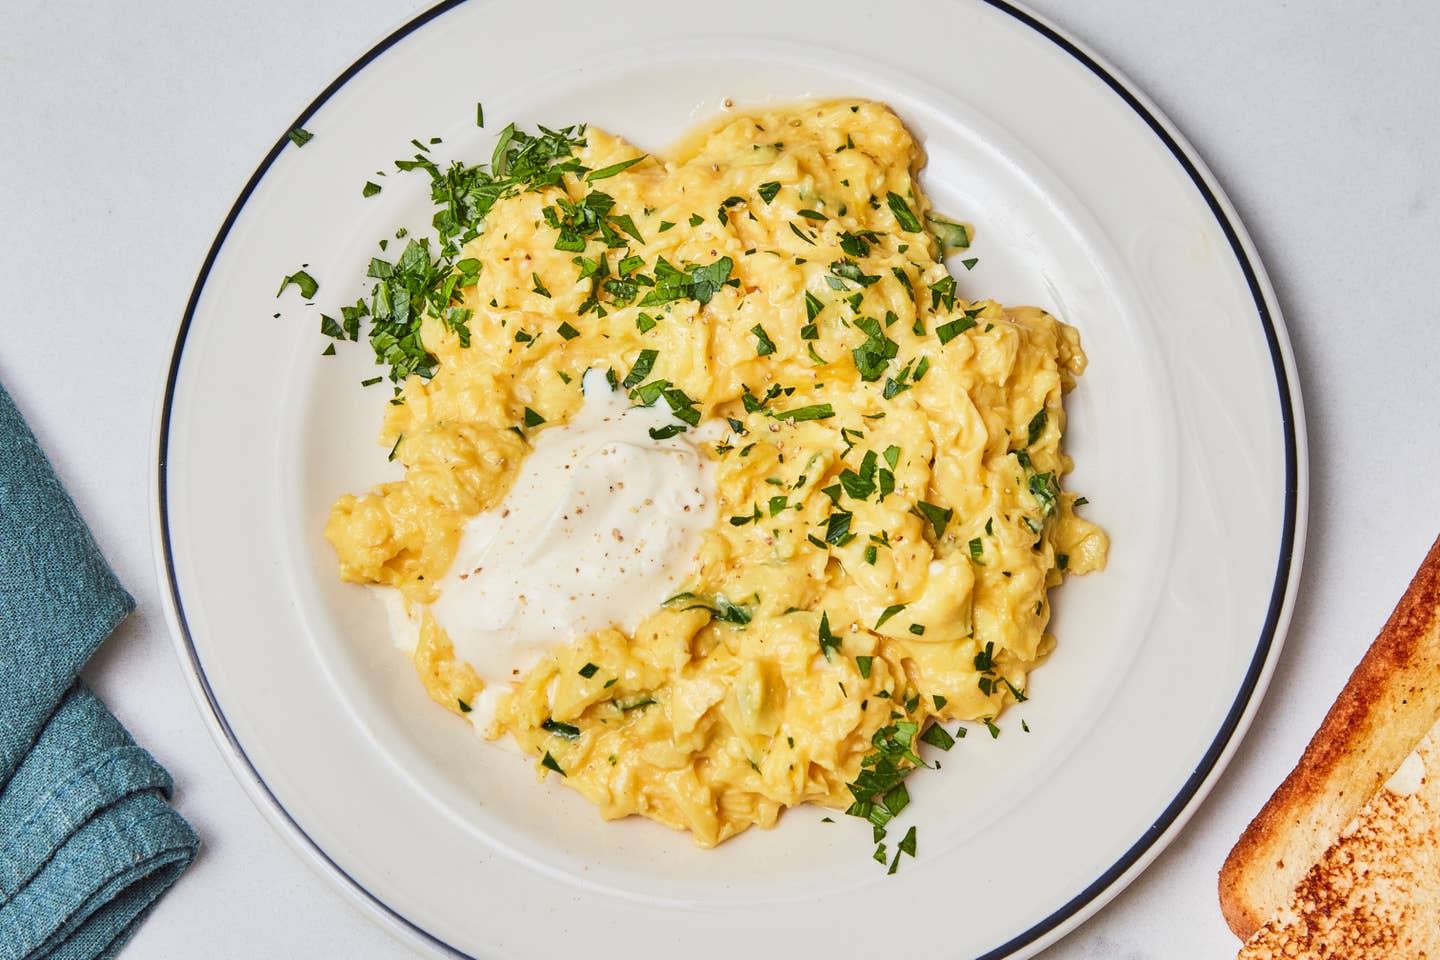 For Perfect Soft-Scrambled Eggs, Hold the Cream